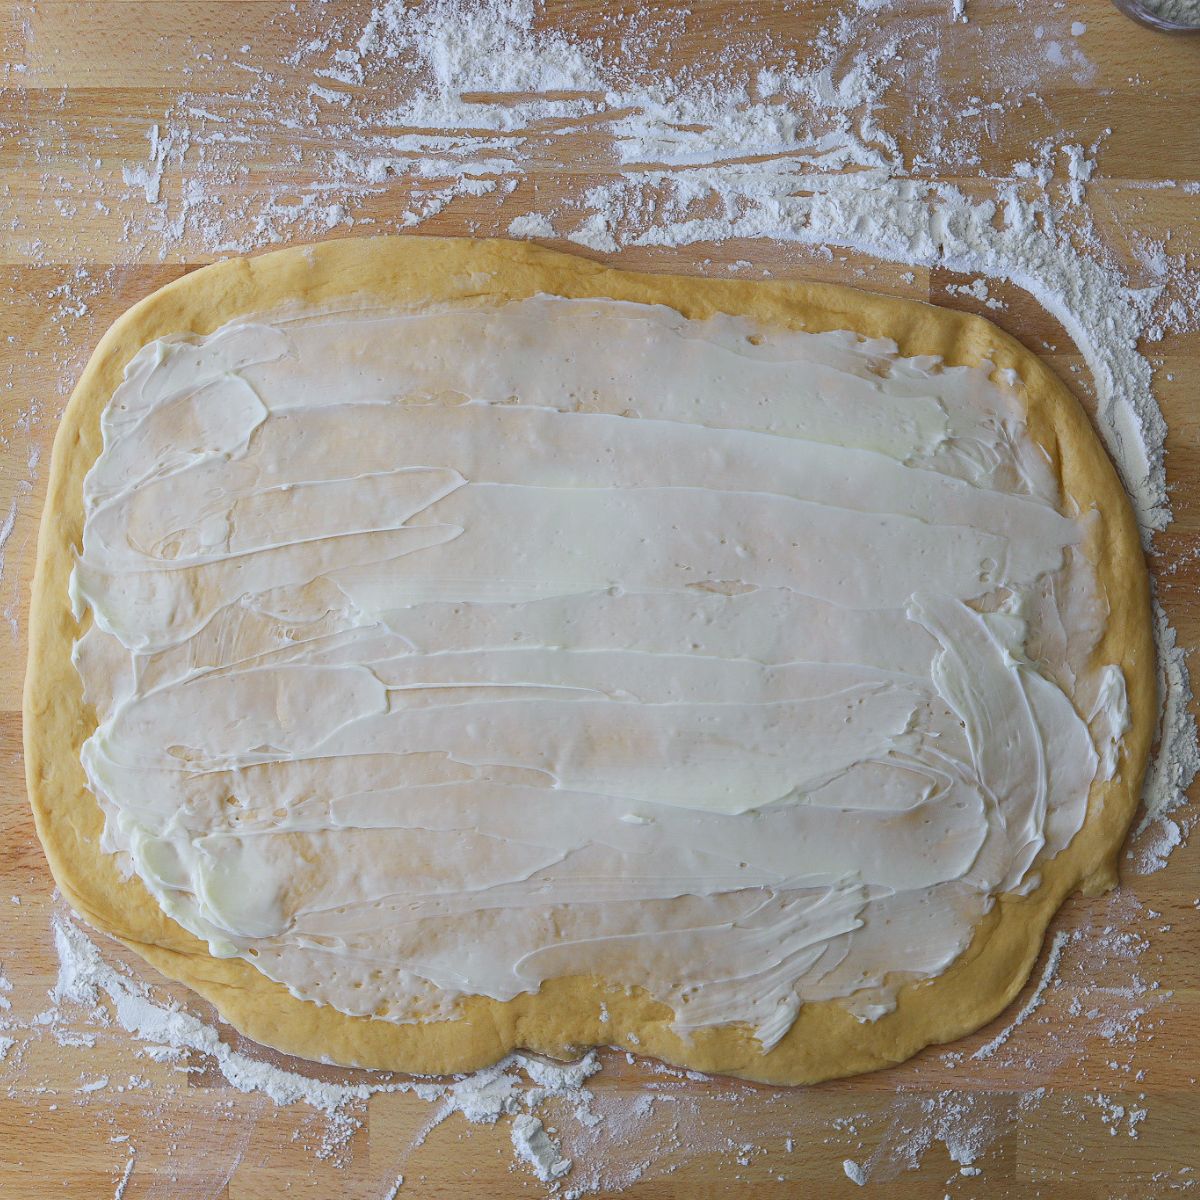 dough rolled out into a rectangle and coated in a layer of butter.